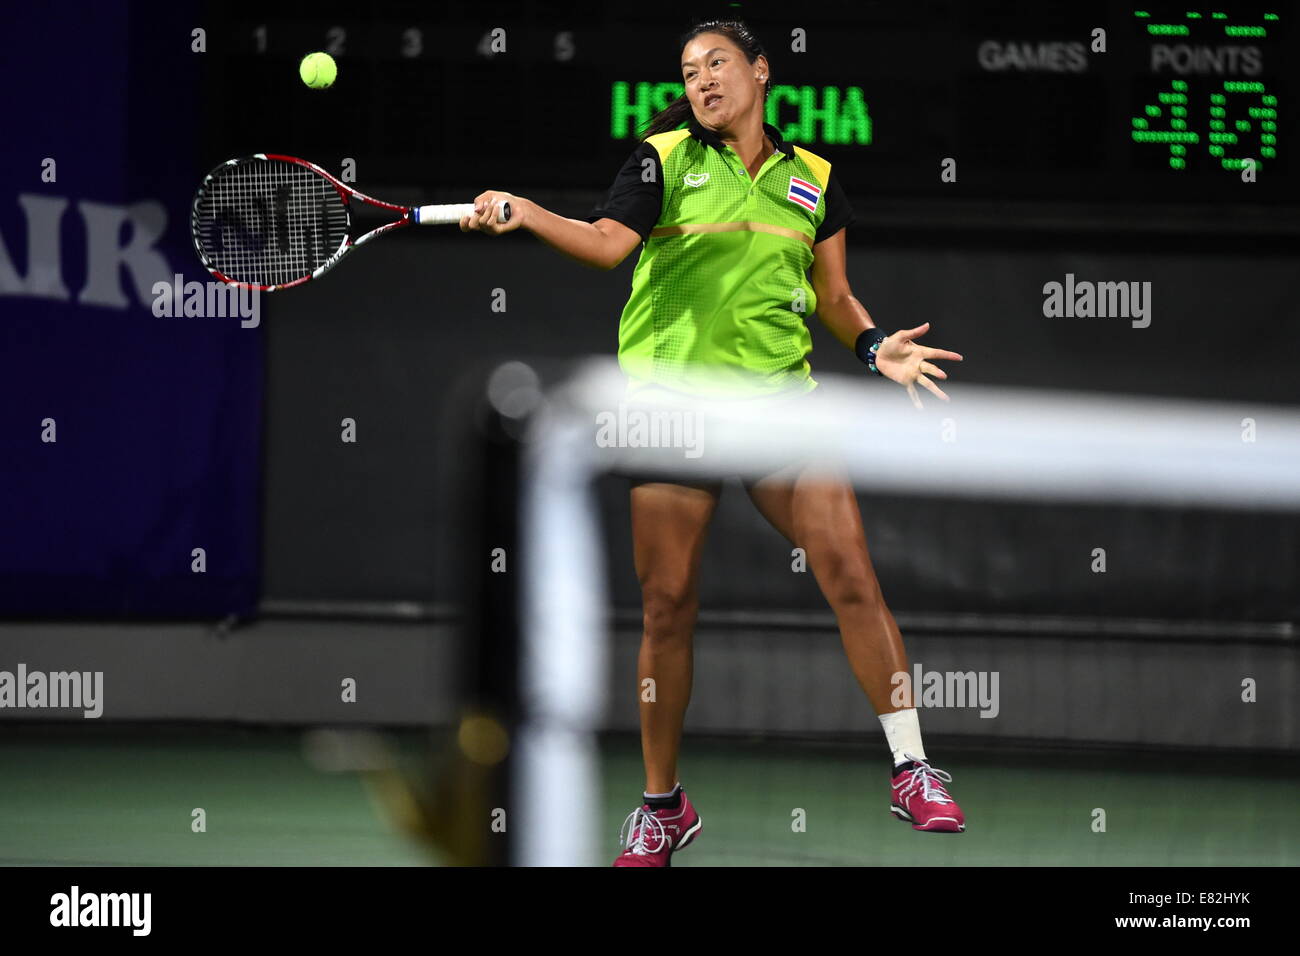 Incheon, South Korea. 29th Sep, 2014. Tanasugarn Tamarine of Thailand returns the ball during the women's doubles gold medal match of tennis against Hsieh Su Wei and Chan Chin Wei of Chinese Taipei at the 17th Asian Games in Incheon, South Korea, Sept. 29, 2014. Thailand defeated Chinese Taipei 2-1 and claimed the title. © Gao Jianjun/Xinhua/Alamy Live News Stock Photo